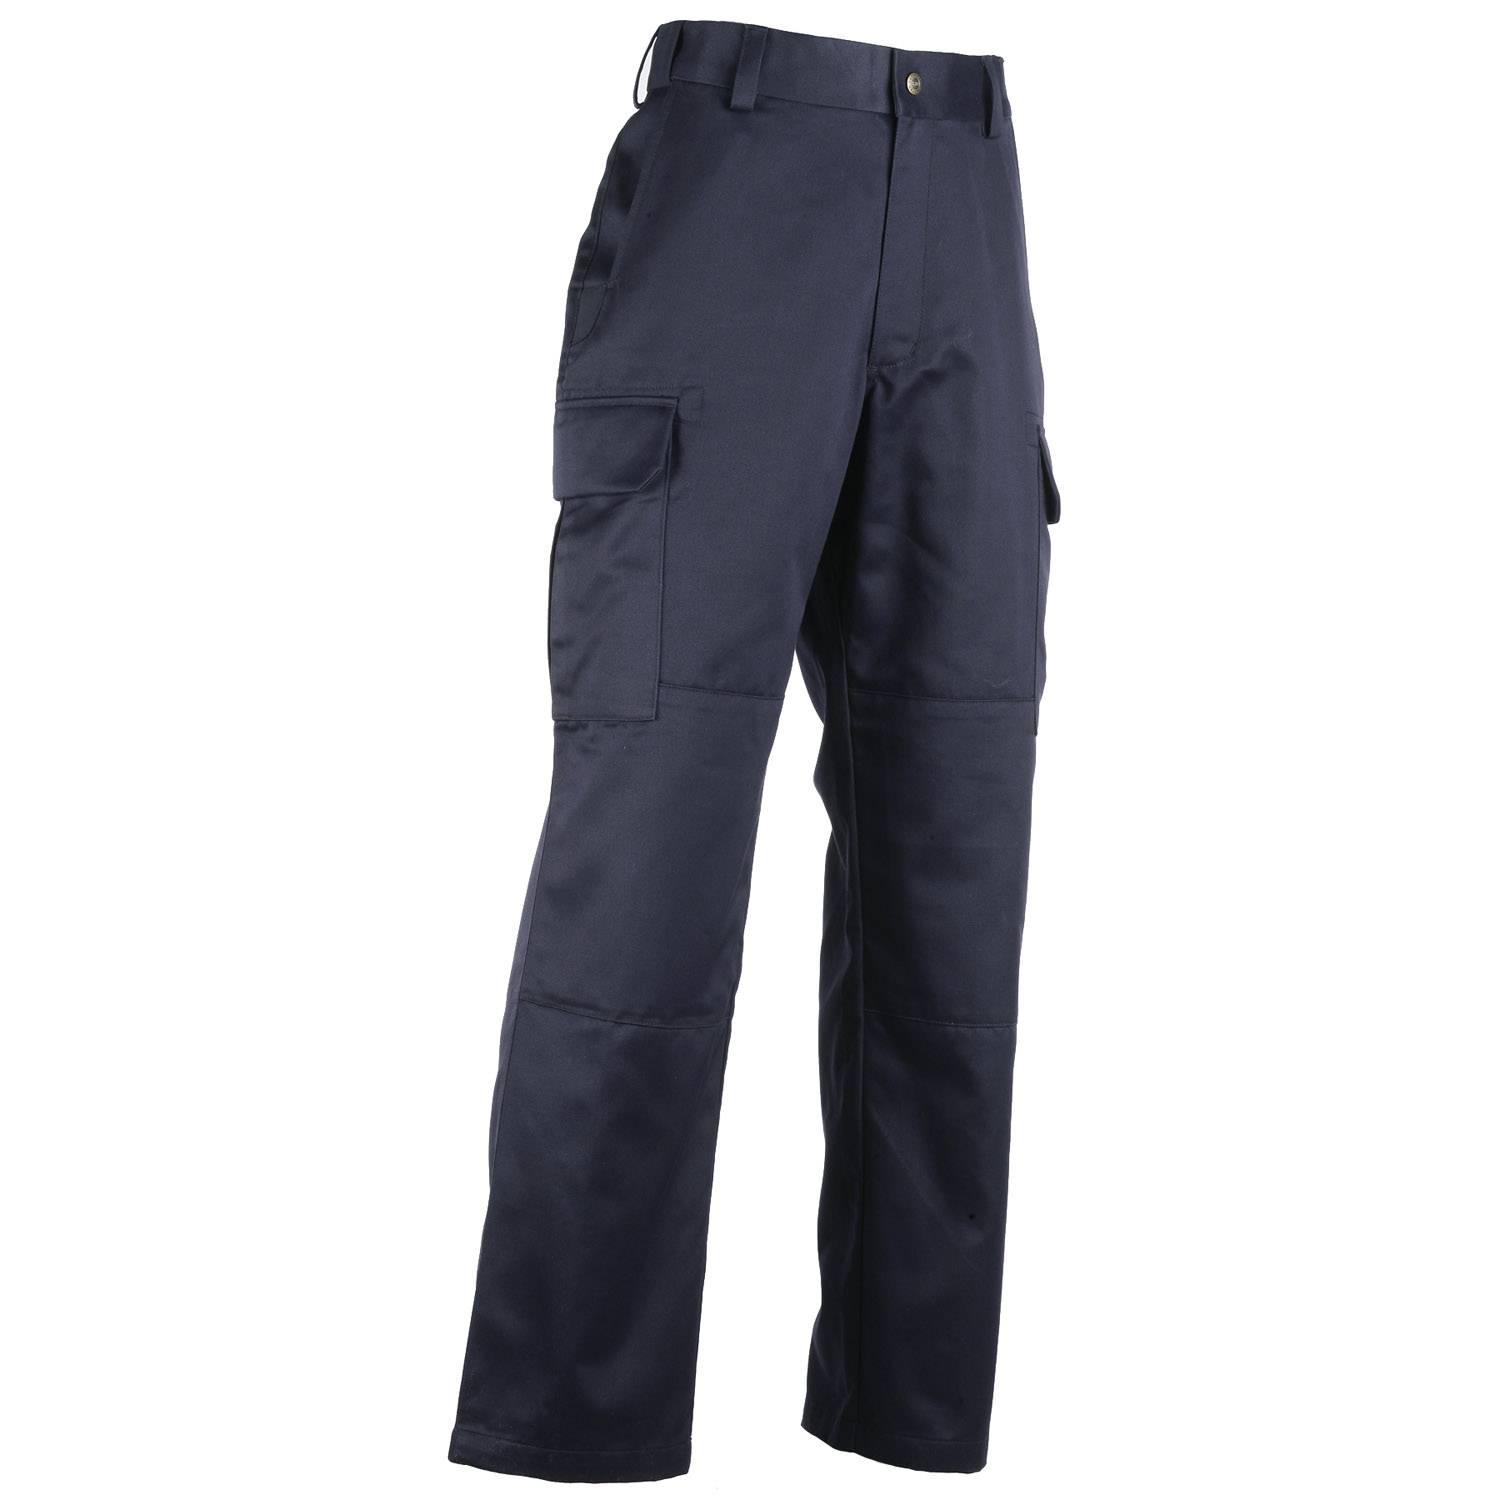 5.11 Tactical Company Cargo Pant